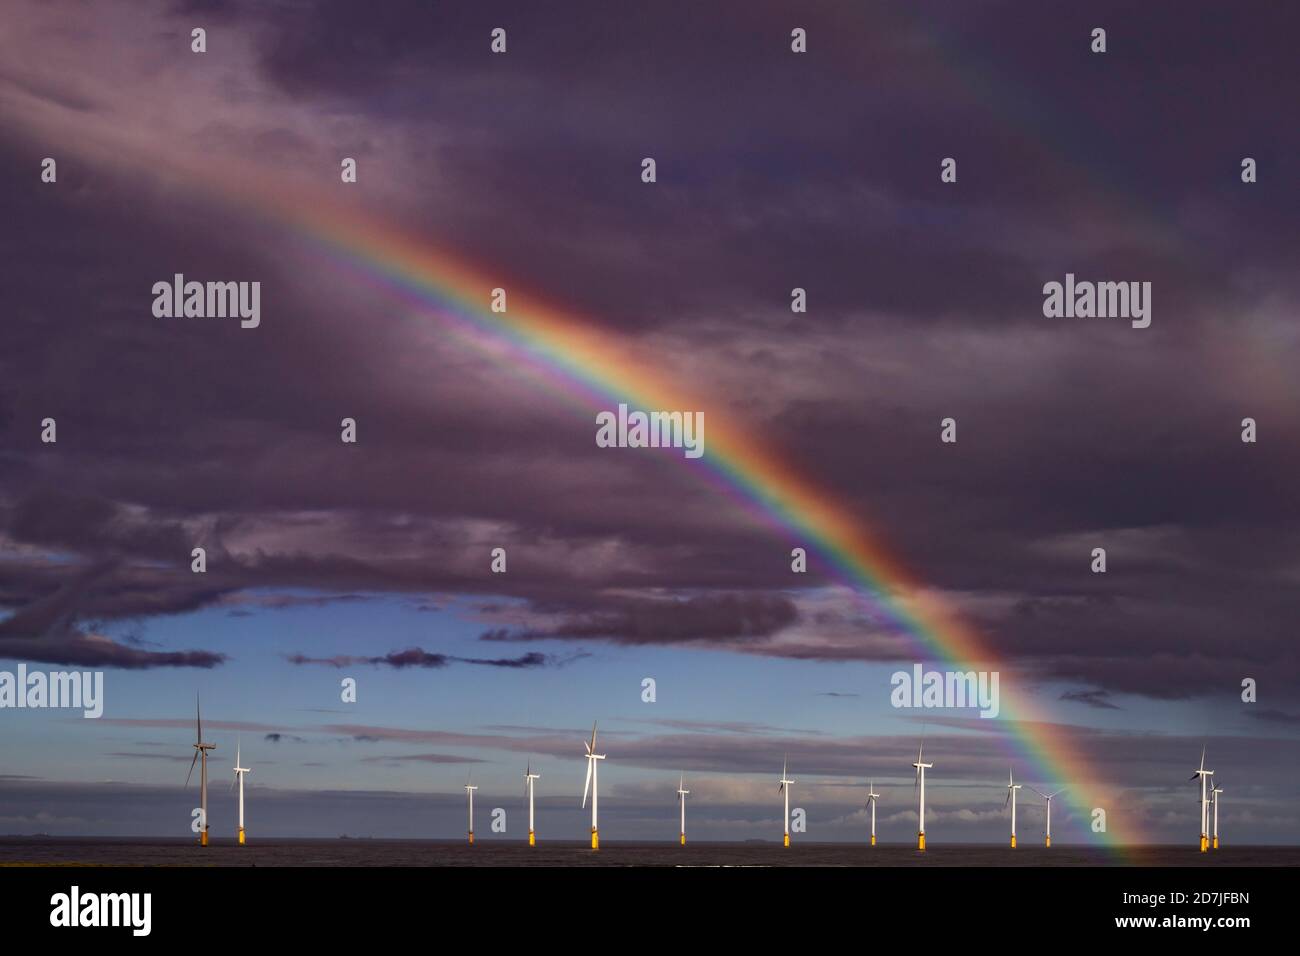 Rainbow Over Wind Turbines, Tees Bay, Redcar, Cleveland Foto Stock